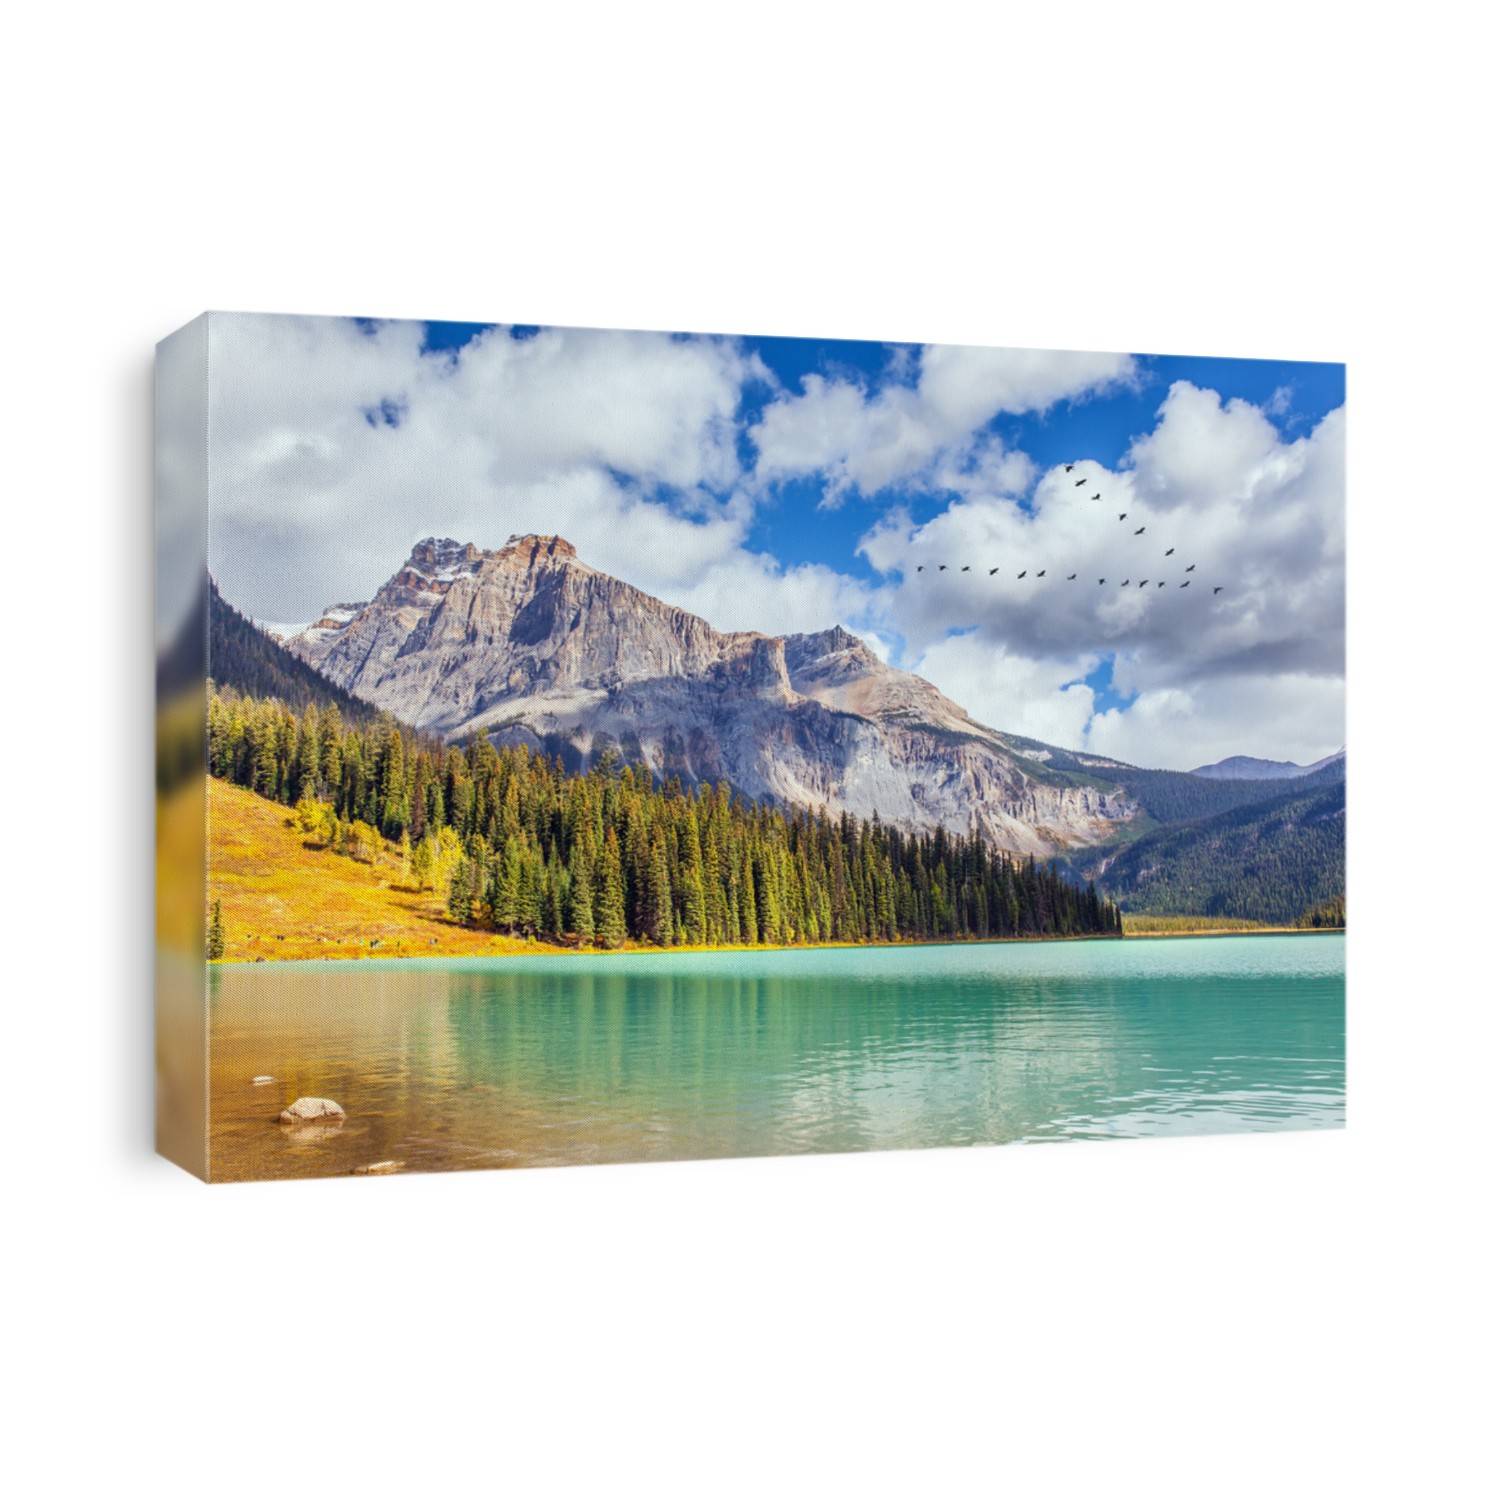 Magnificent Emerald Lake. Picturesque huge lake in the Canadian Rockies. Early morning. Coniferous forest and mountain peaks surround the lake with azure water.